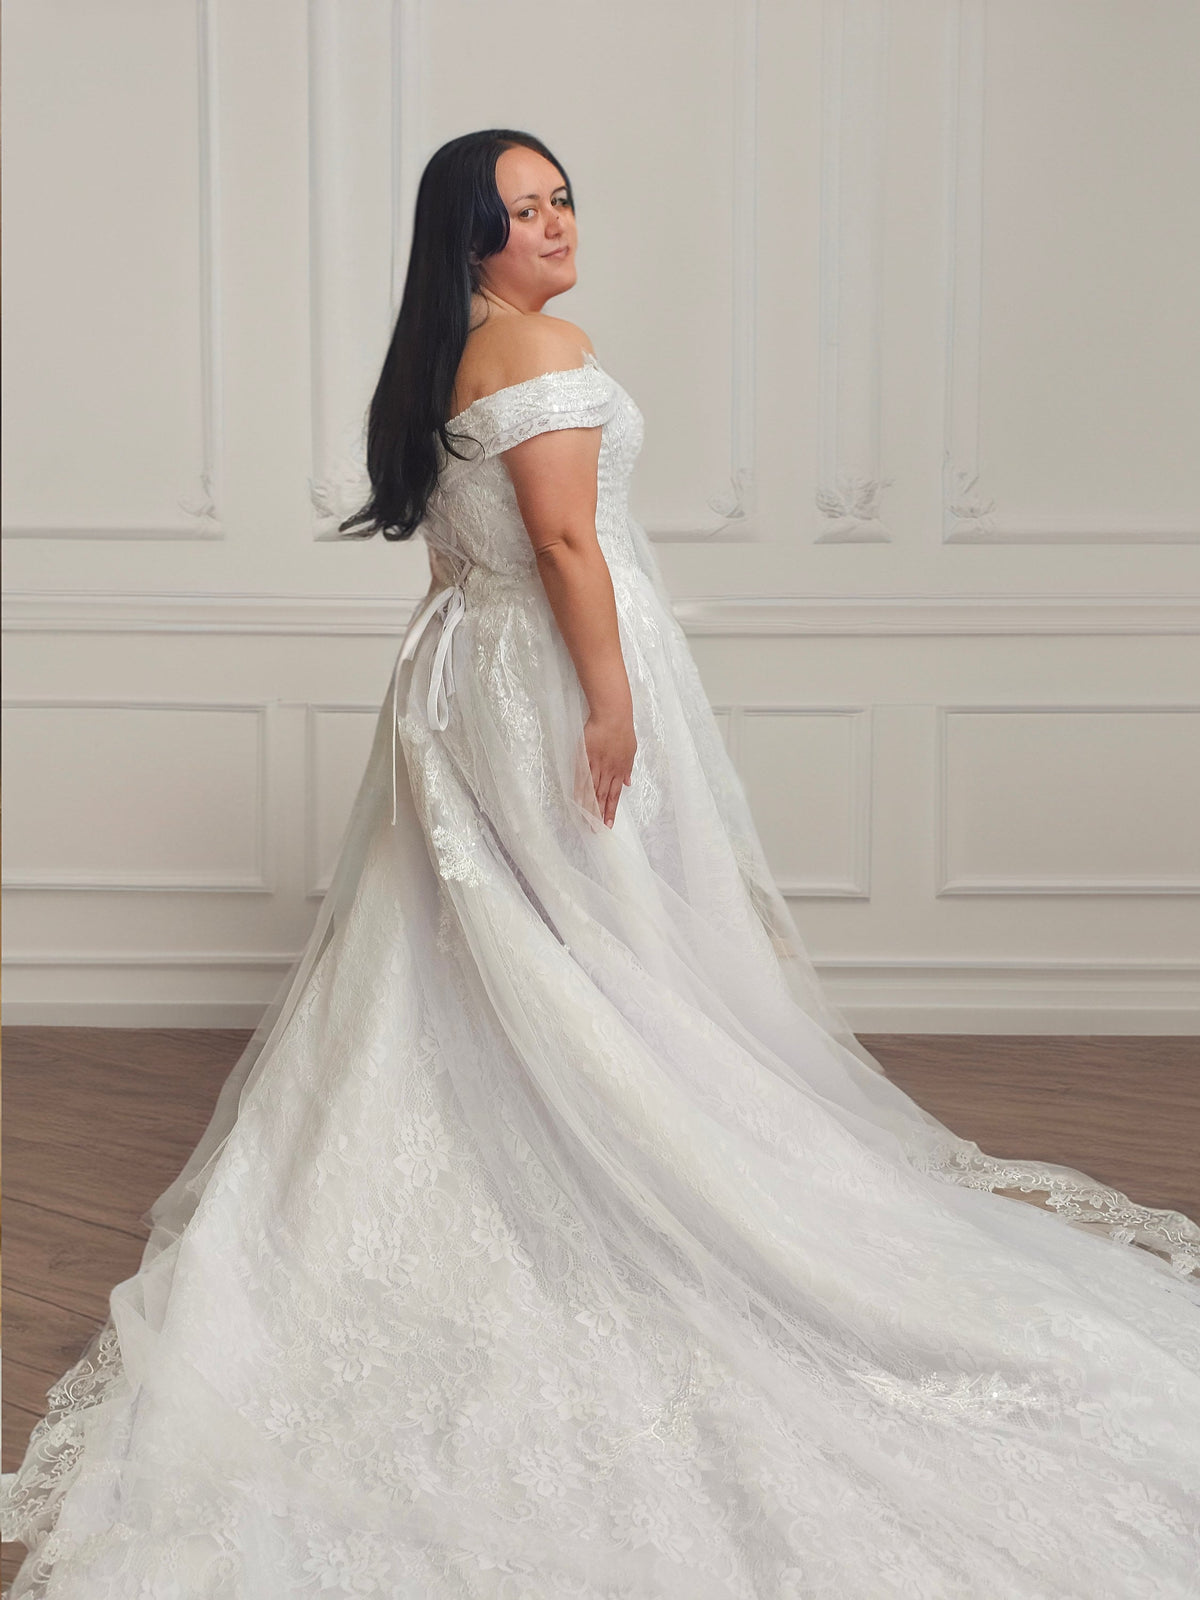 Stunning Beaded Princess Wedding Dress Bridal Gown Ball Gown Style Off the Shoulder Beaded Bodice Long Train